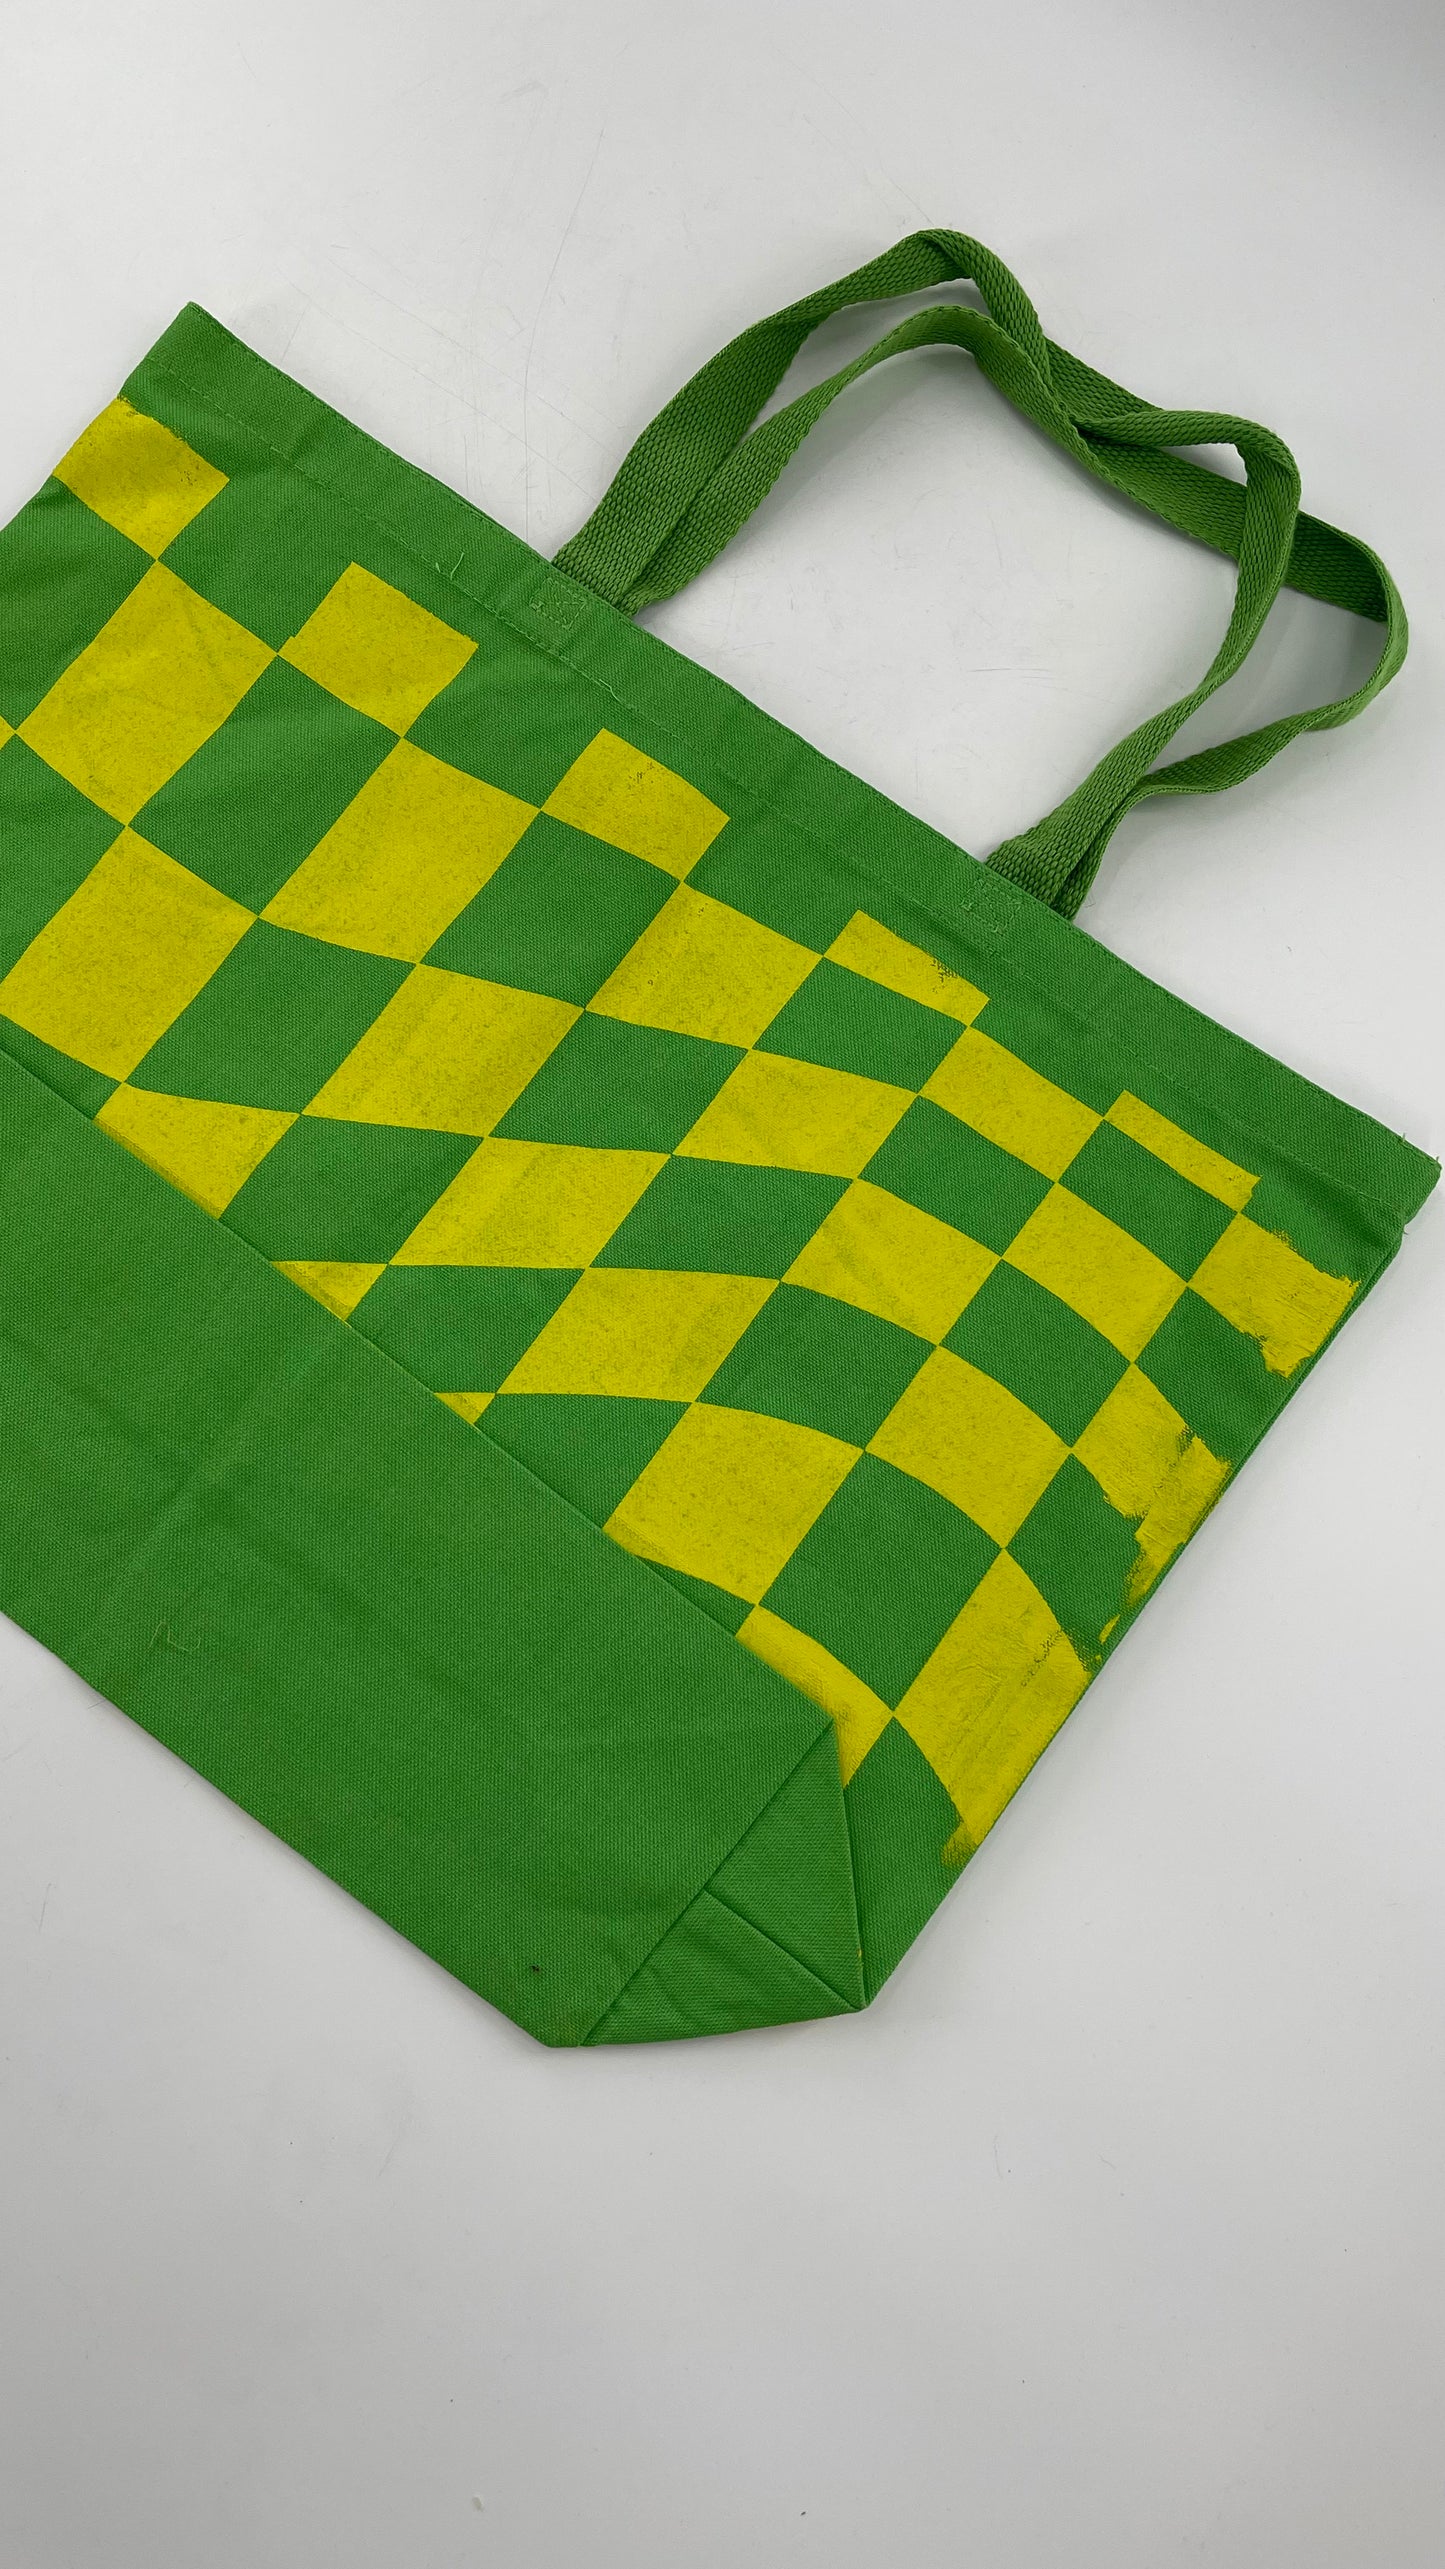 Desert Dreamer Urban Outfitters Checkered Green Canvas Tote